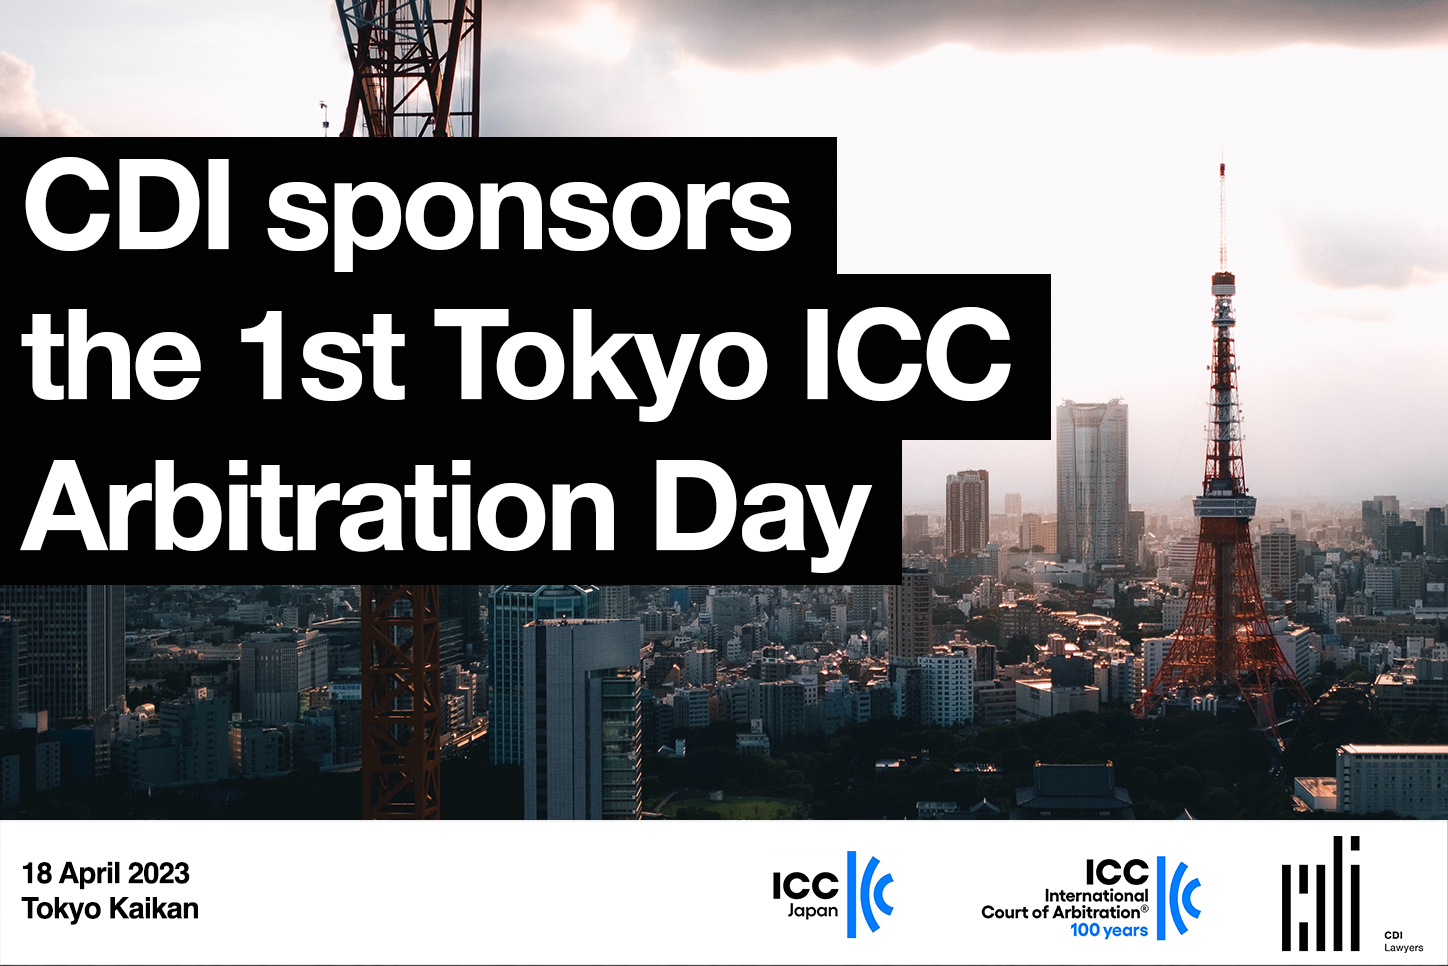 CDI sponsors the 1st Tokyo ICC Arbitration Day